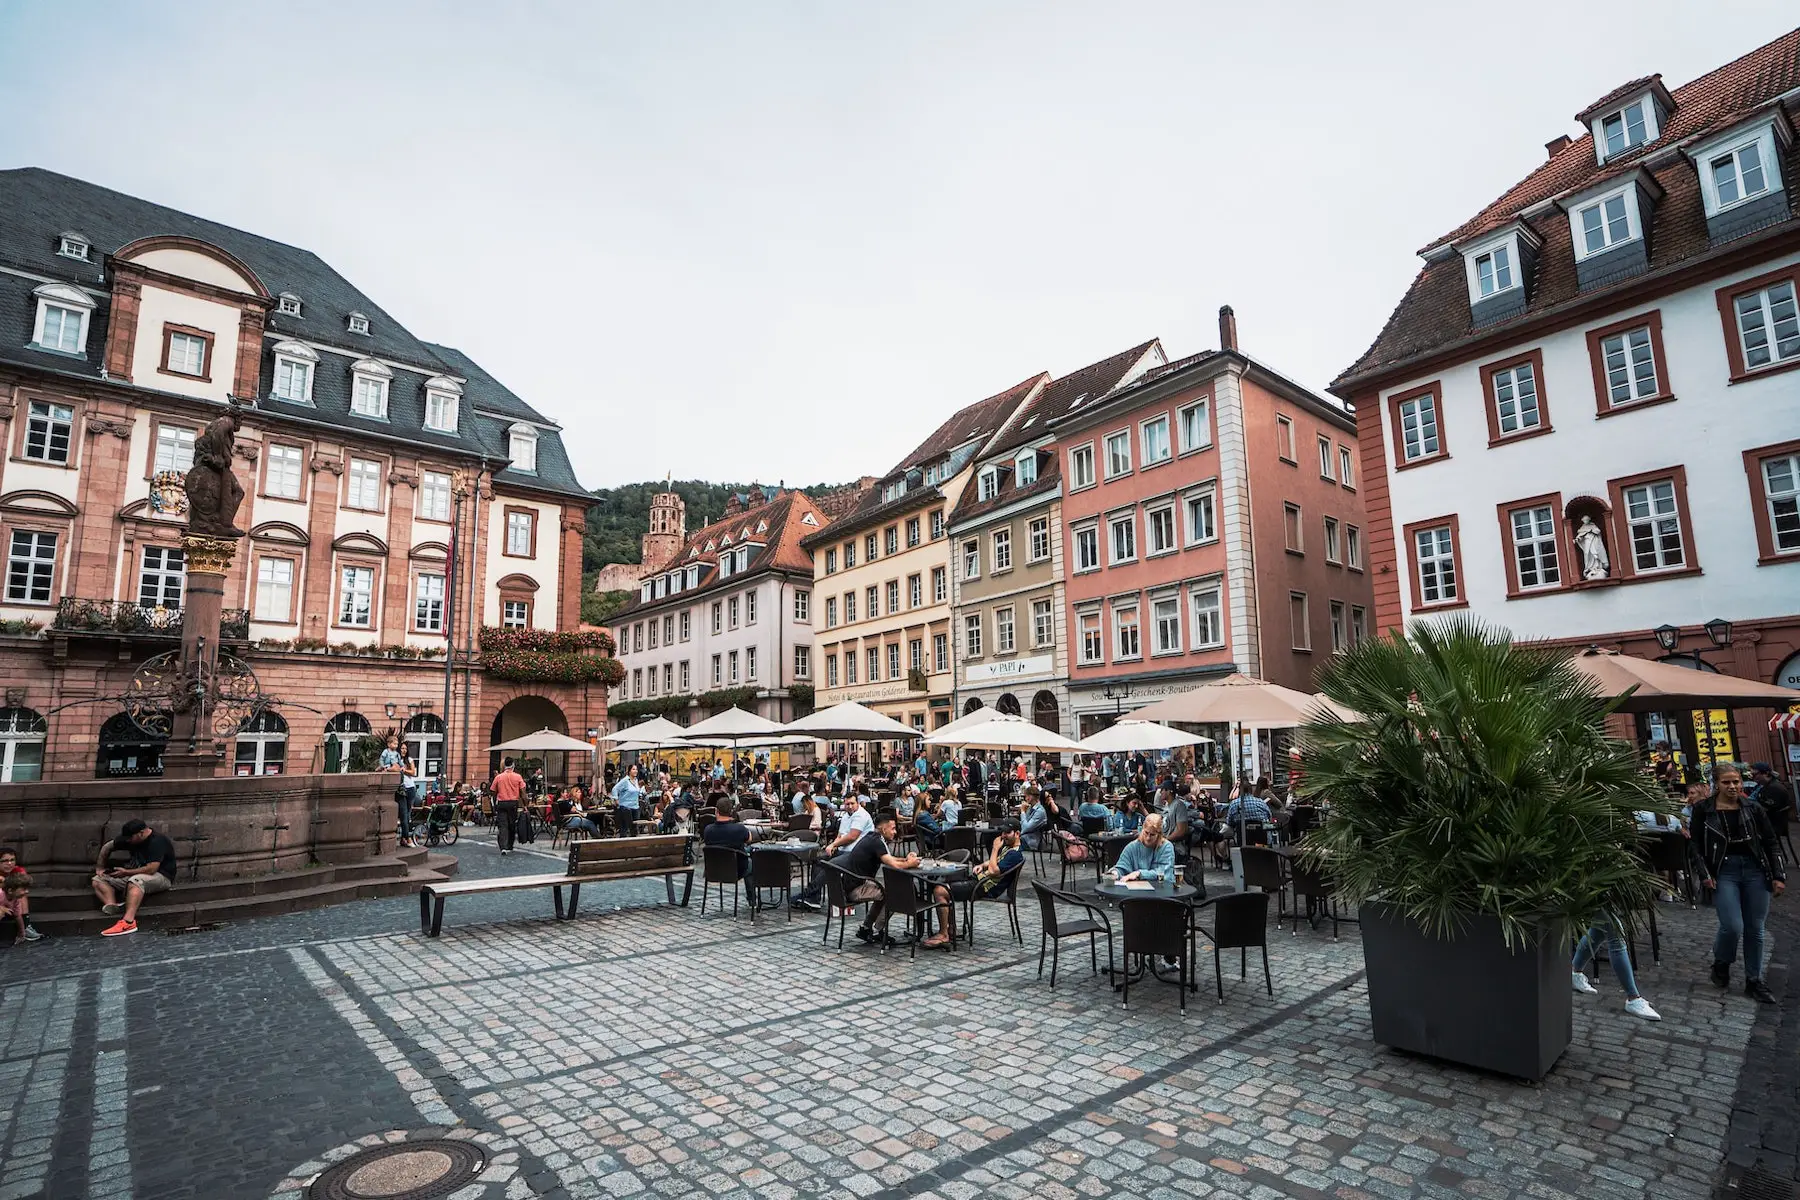 An old German market square is lined with restaurants and umbrella-covered tables